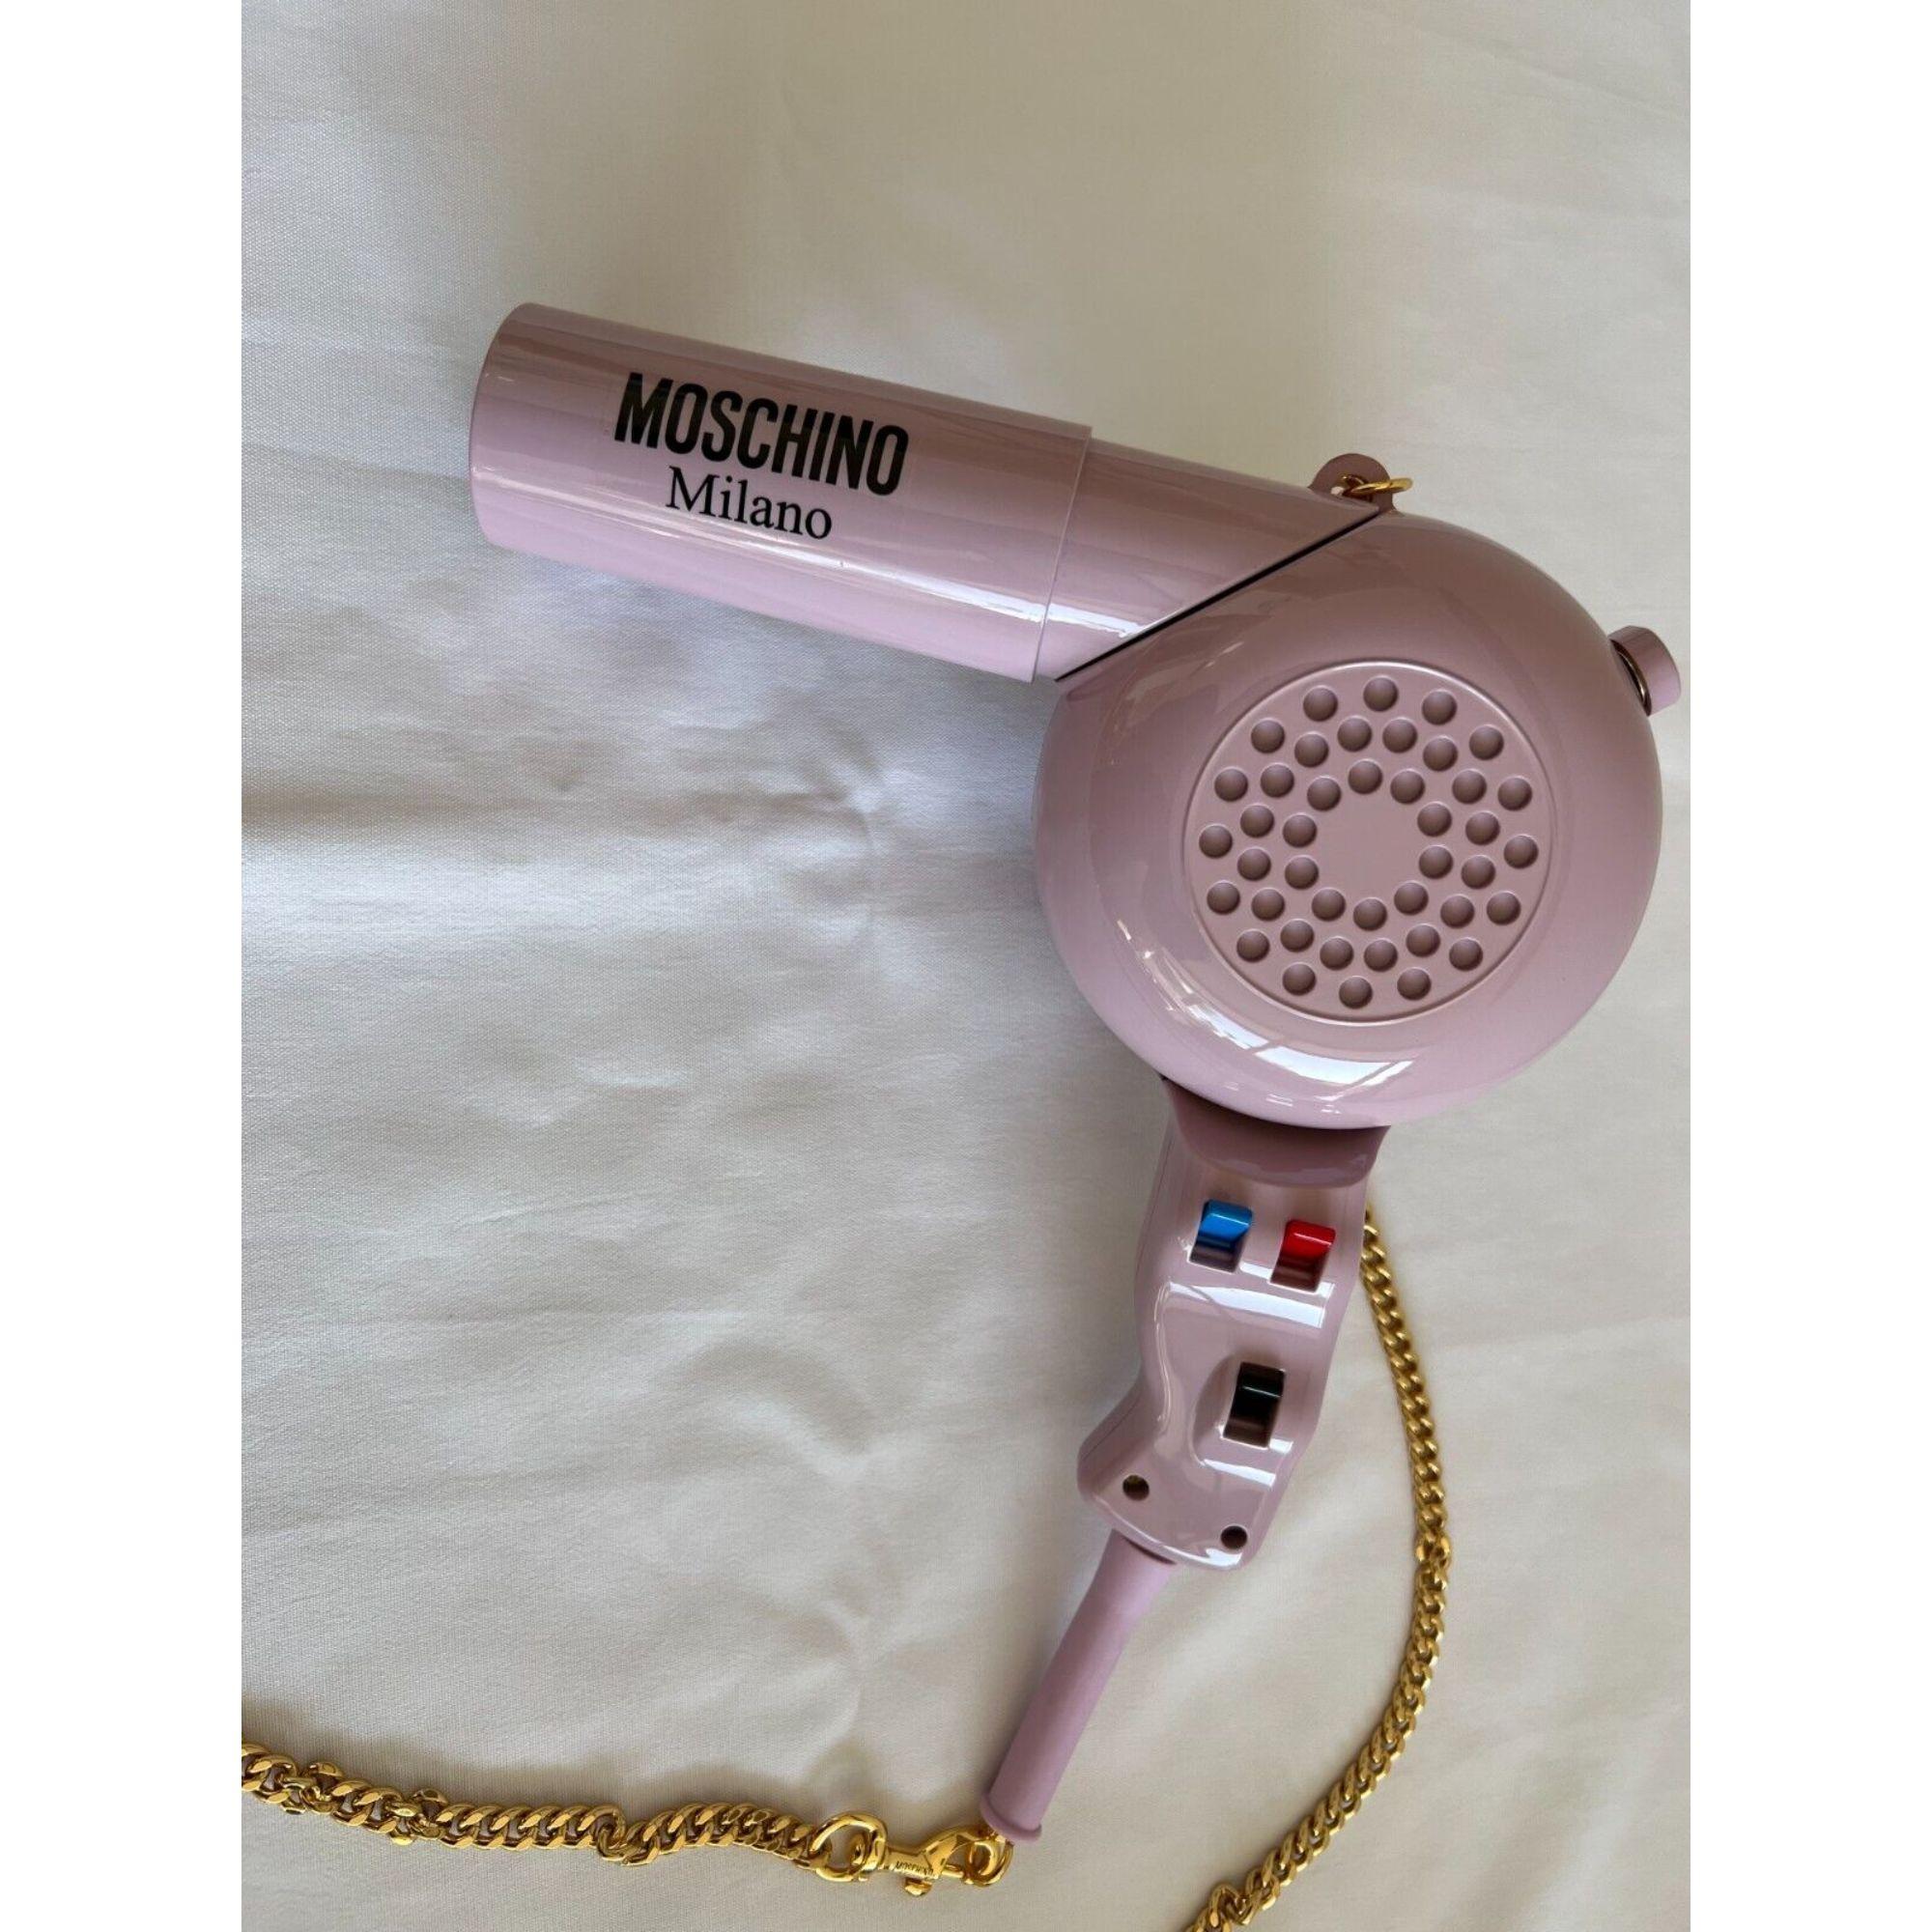 SEP SPECIAL! AW21 Moschino Couture Jeremy Scott Blow Dryer Mini Shoulder Bag

Additional Information:
Material: 100% Plastic
Color: Pink, Gold
Size: Mini
Pattern: Blow Dryer
Style: Shoulder Bag
Dimensions: W: 9.1”, H: 8.3”, D: 3.5”, the compartment